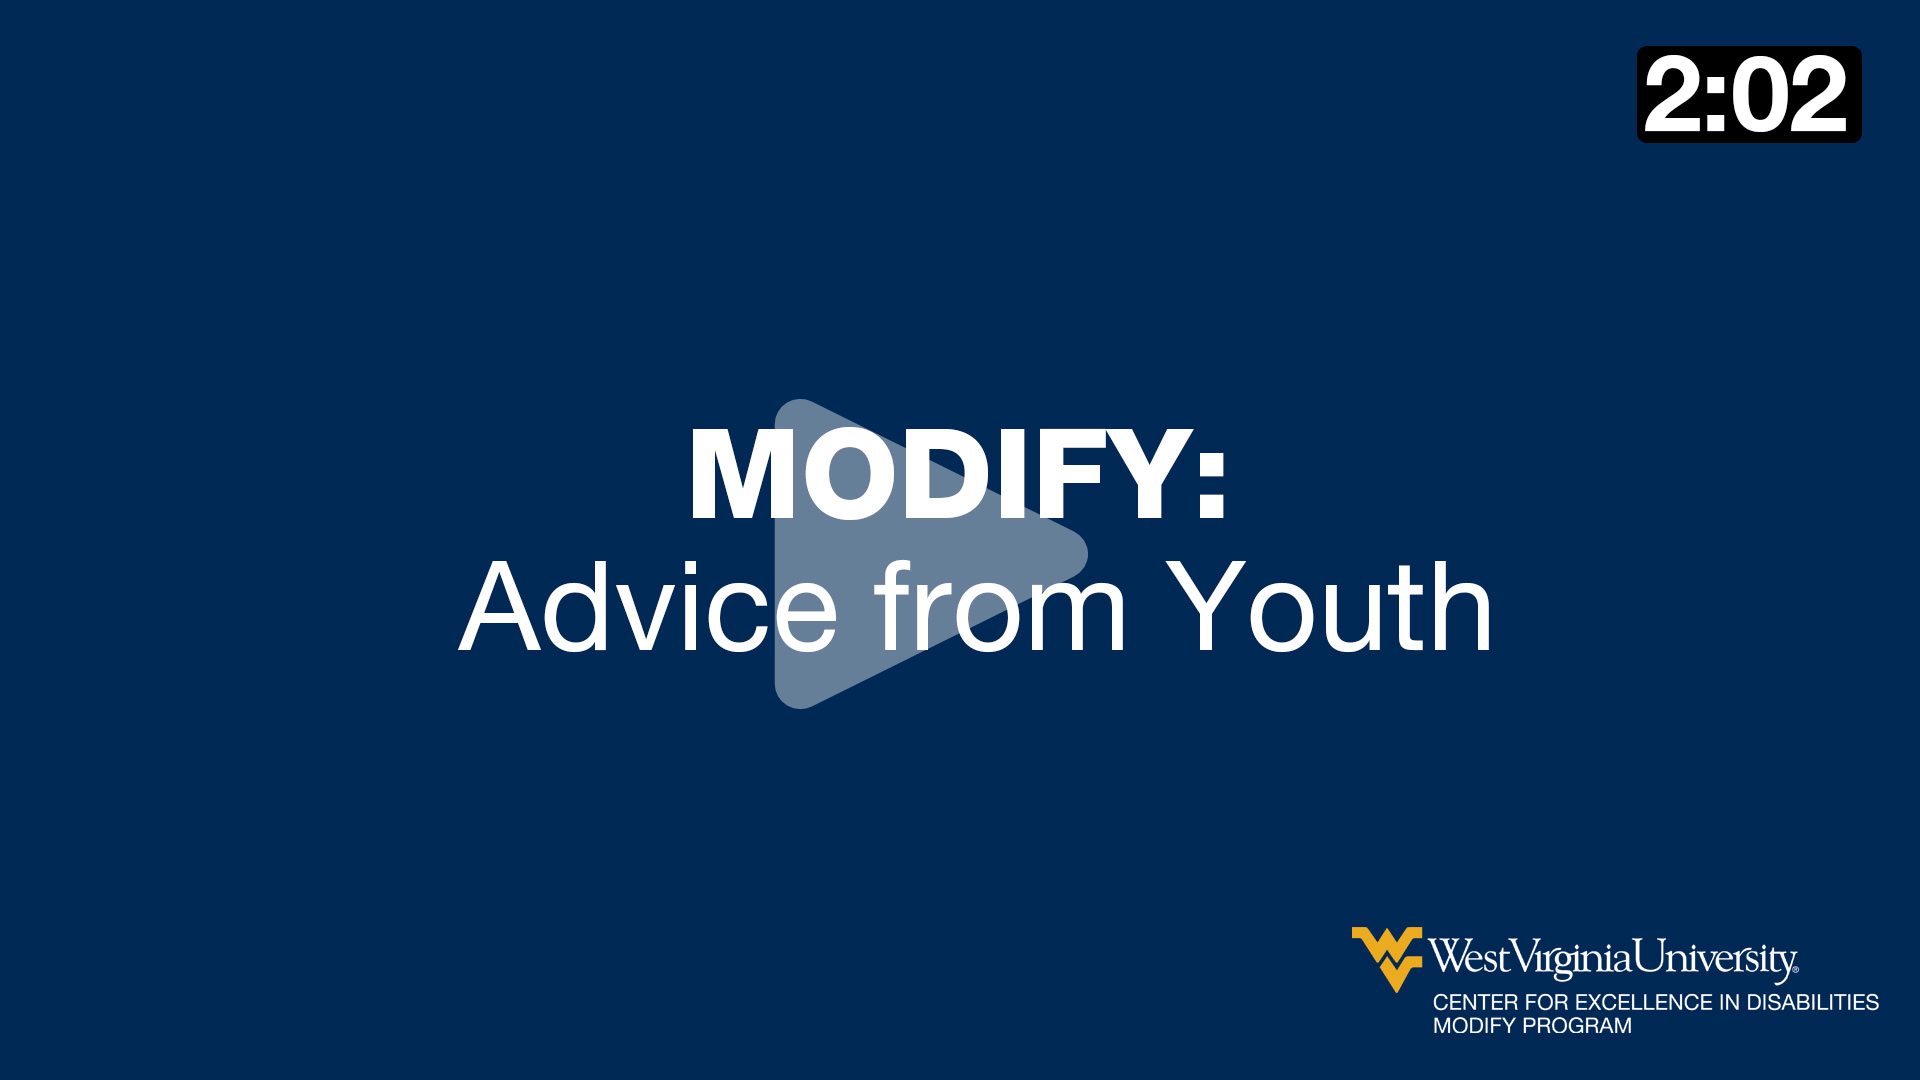 MODIFY: Advice from Youth